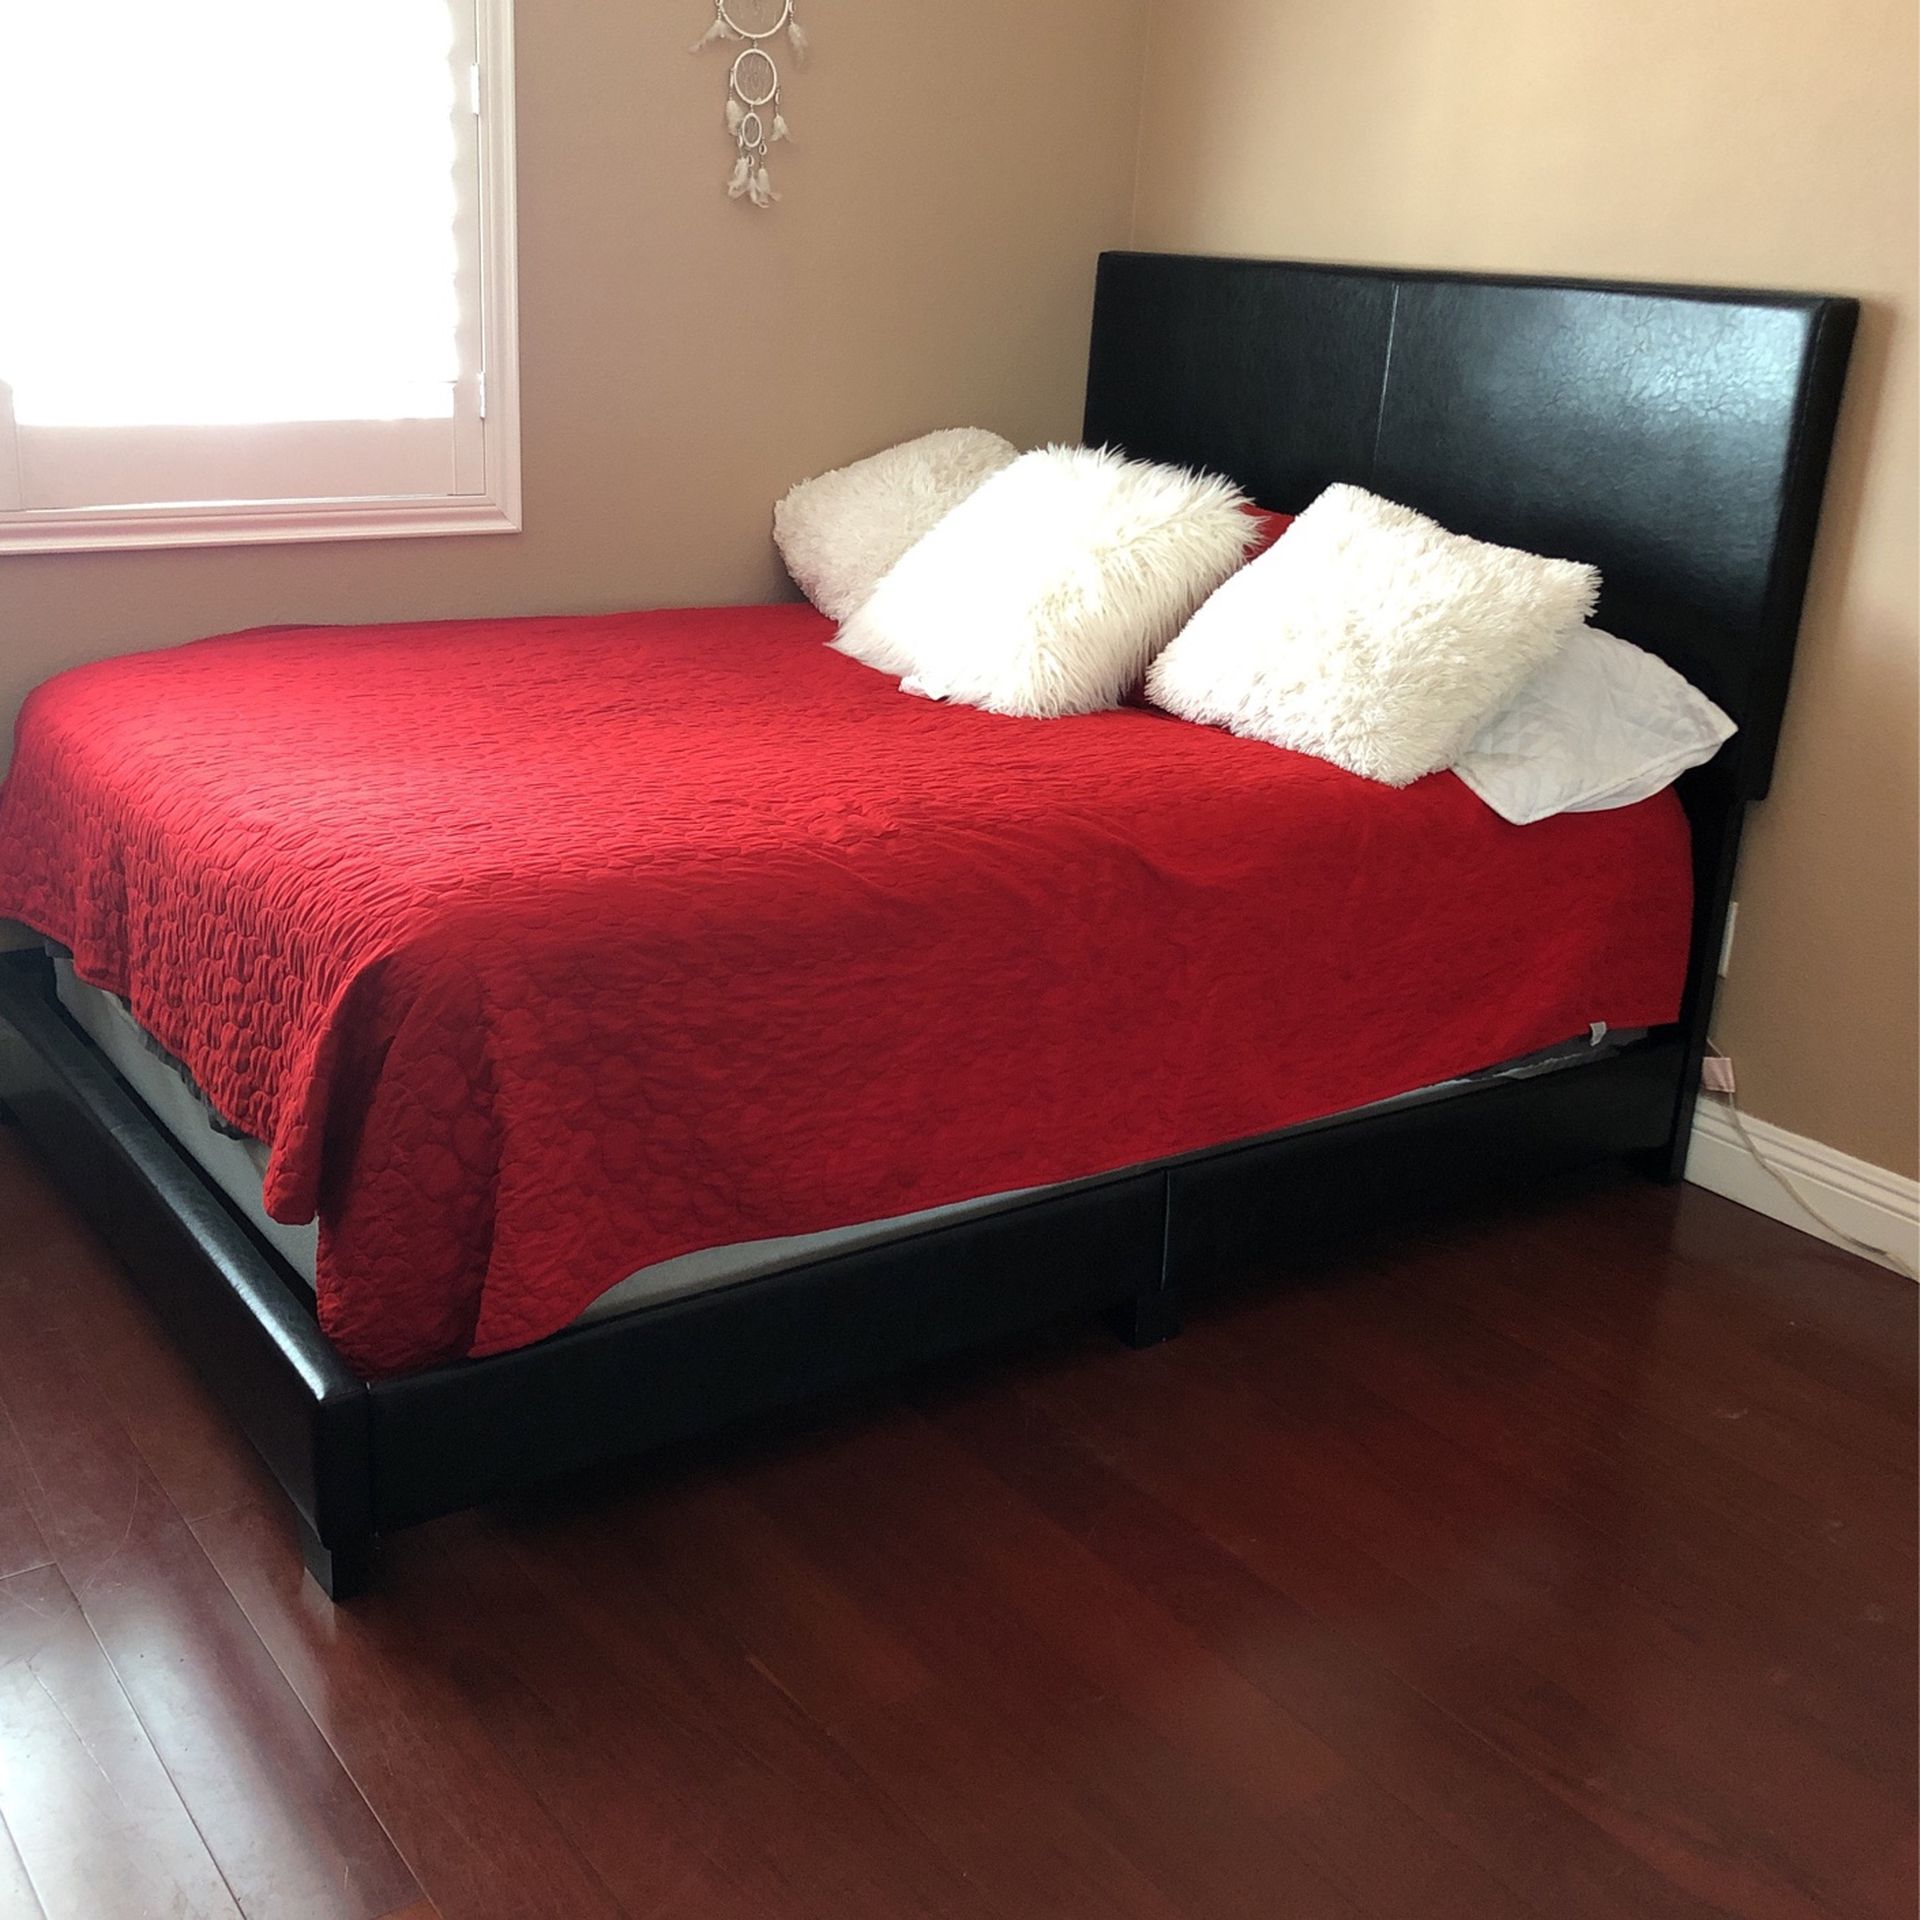 Full size bed $140